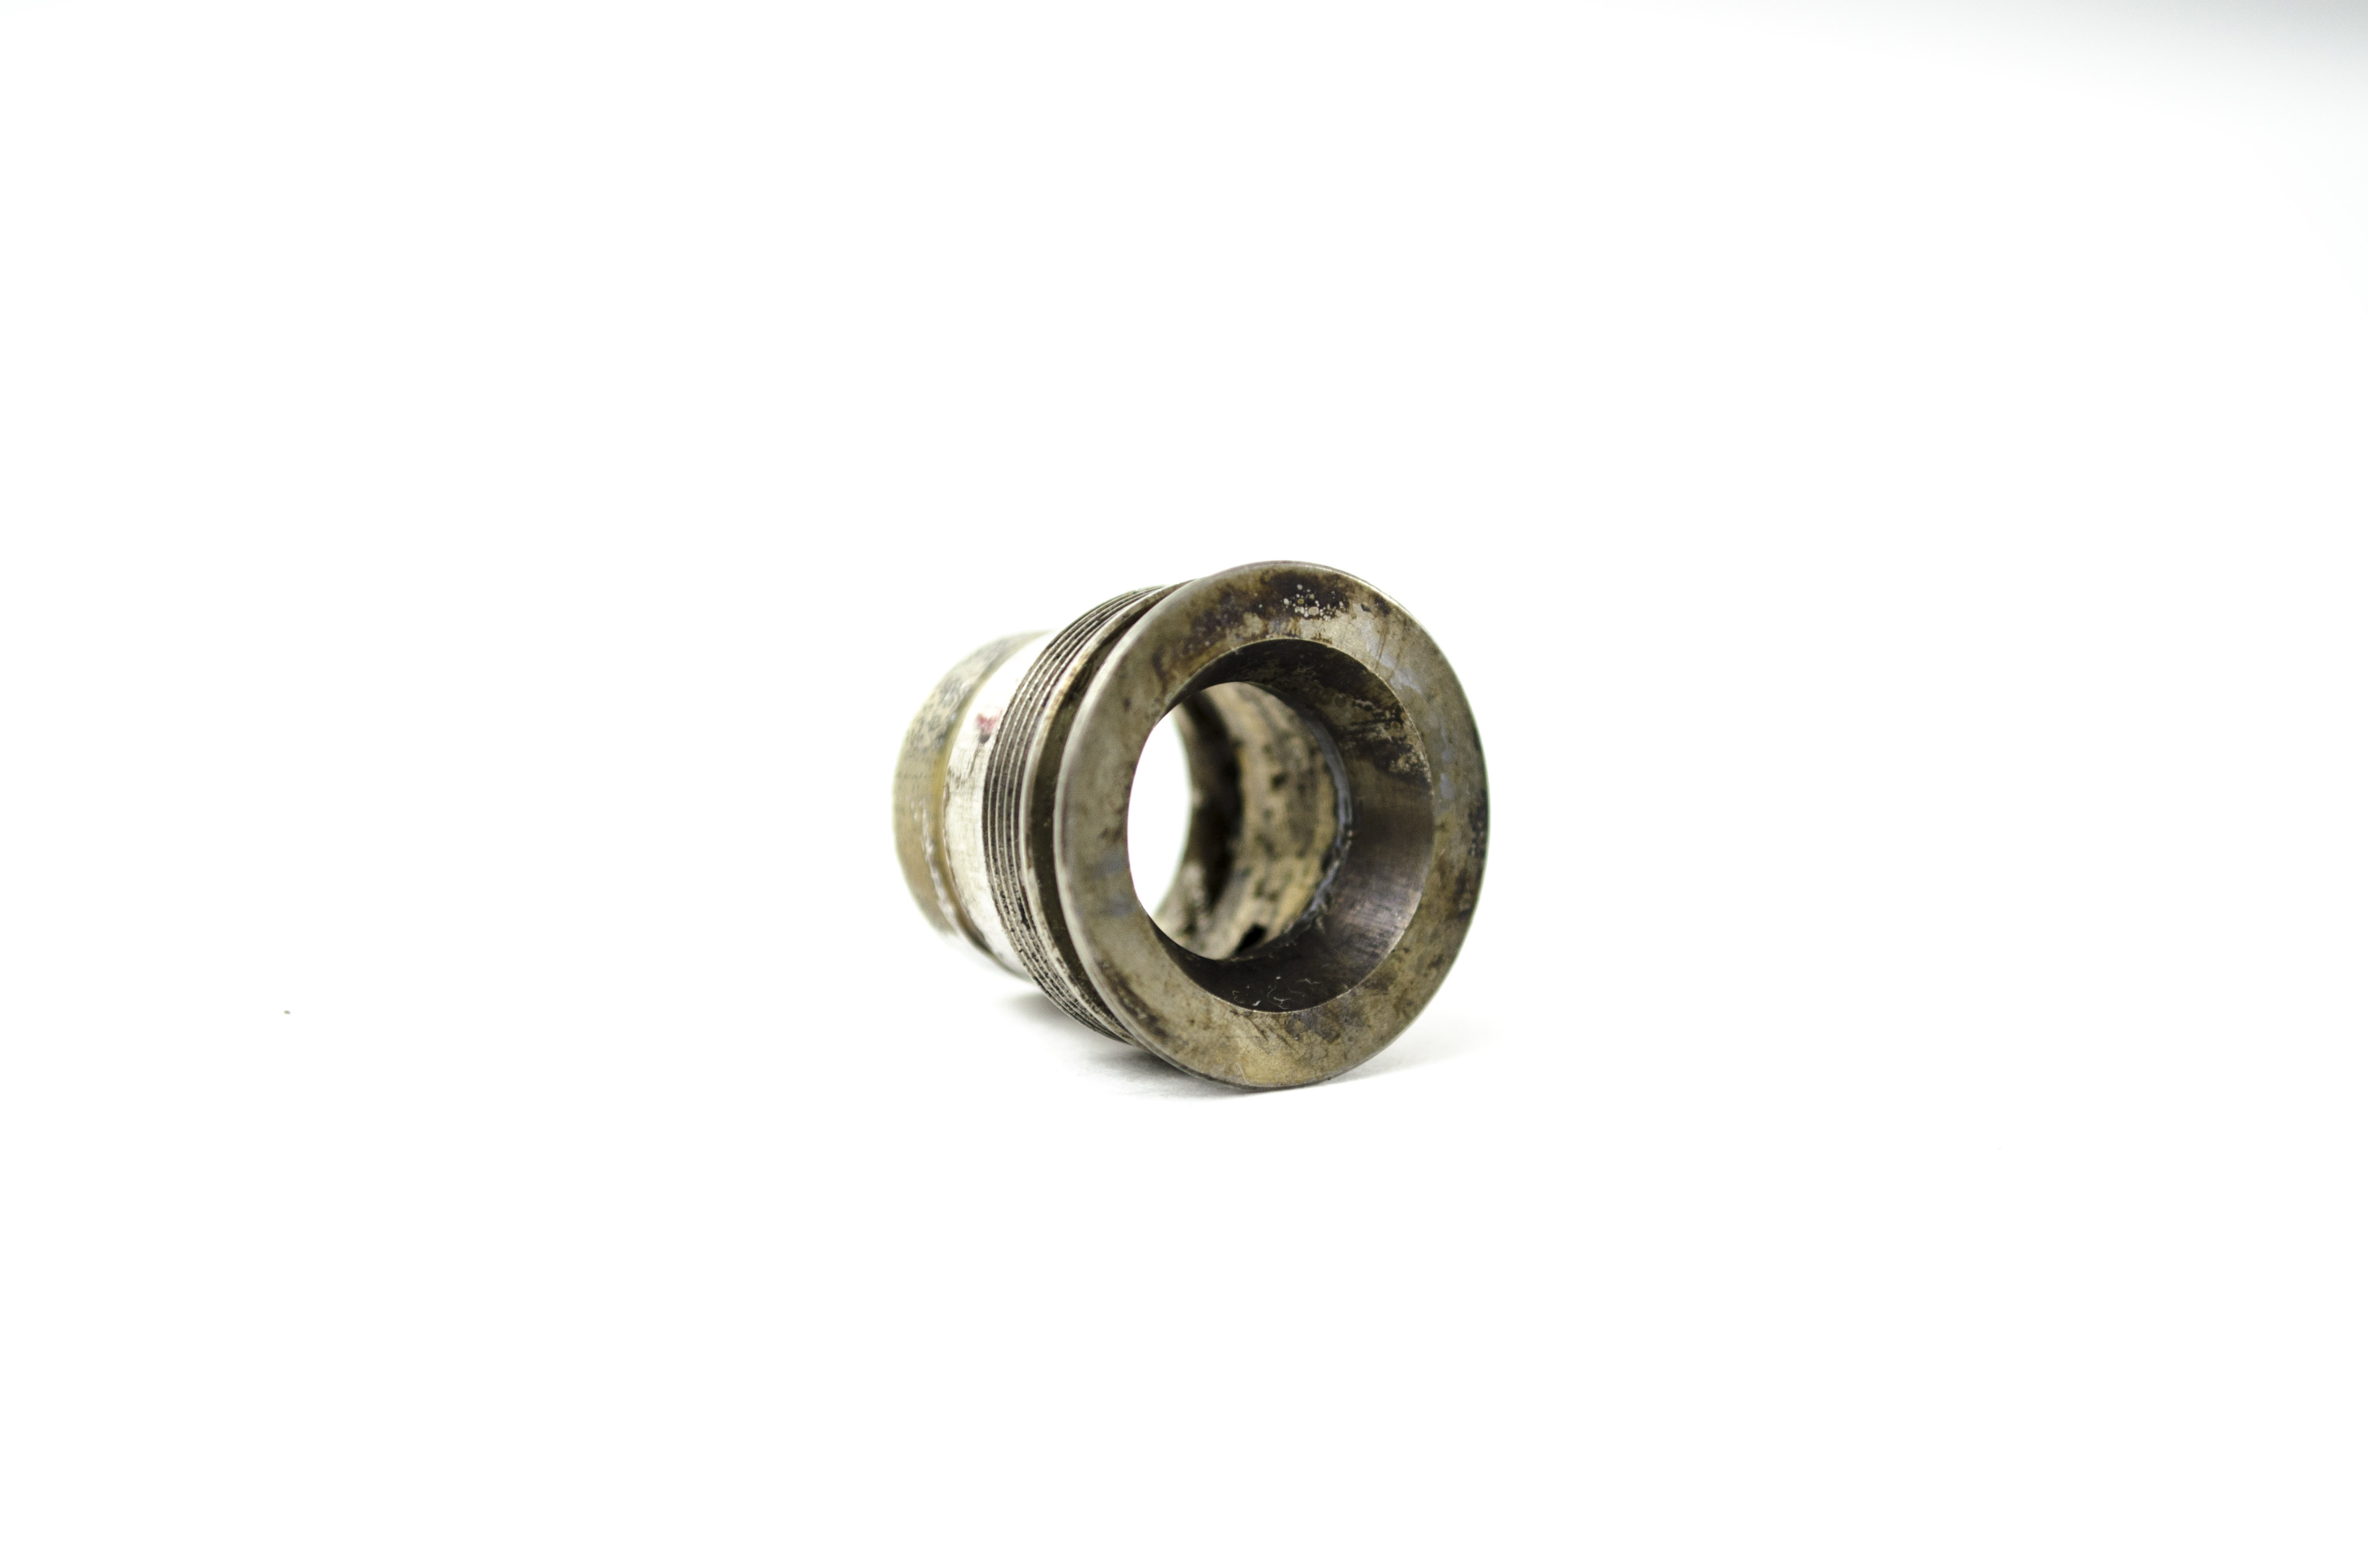 OEM Insertion Tube Proximal End Fitting - CF-P20S